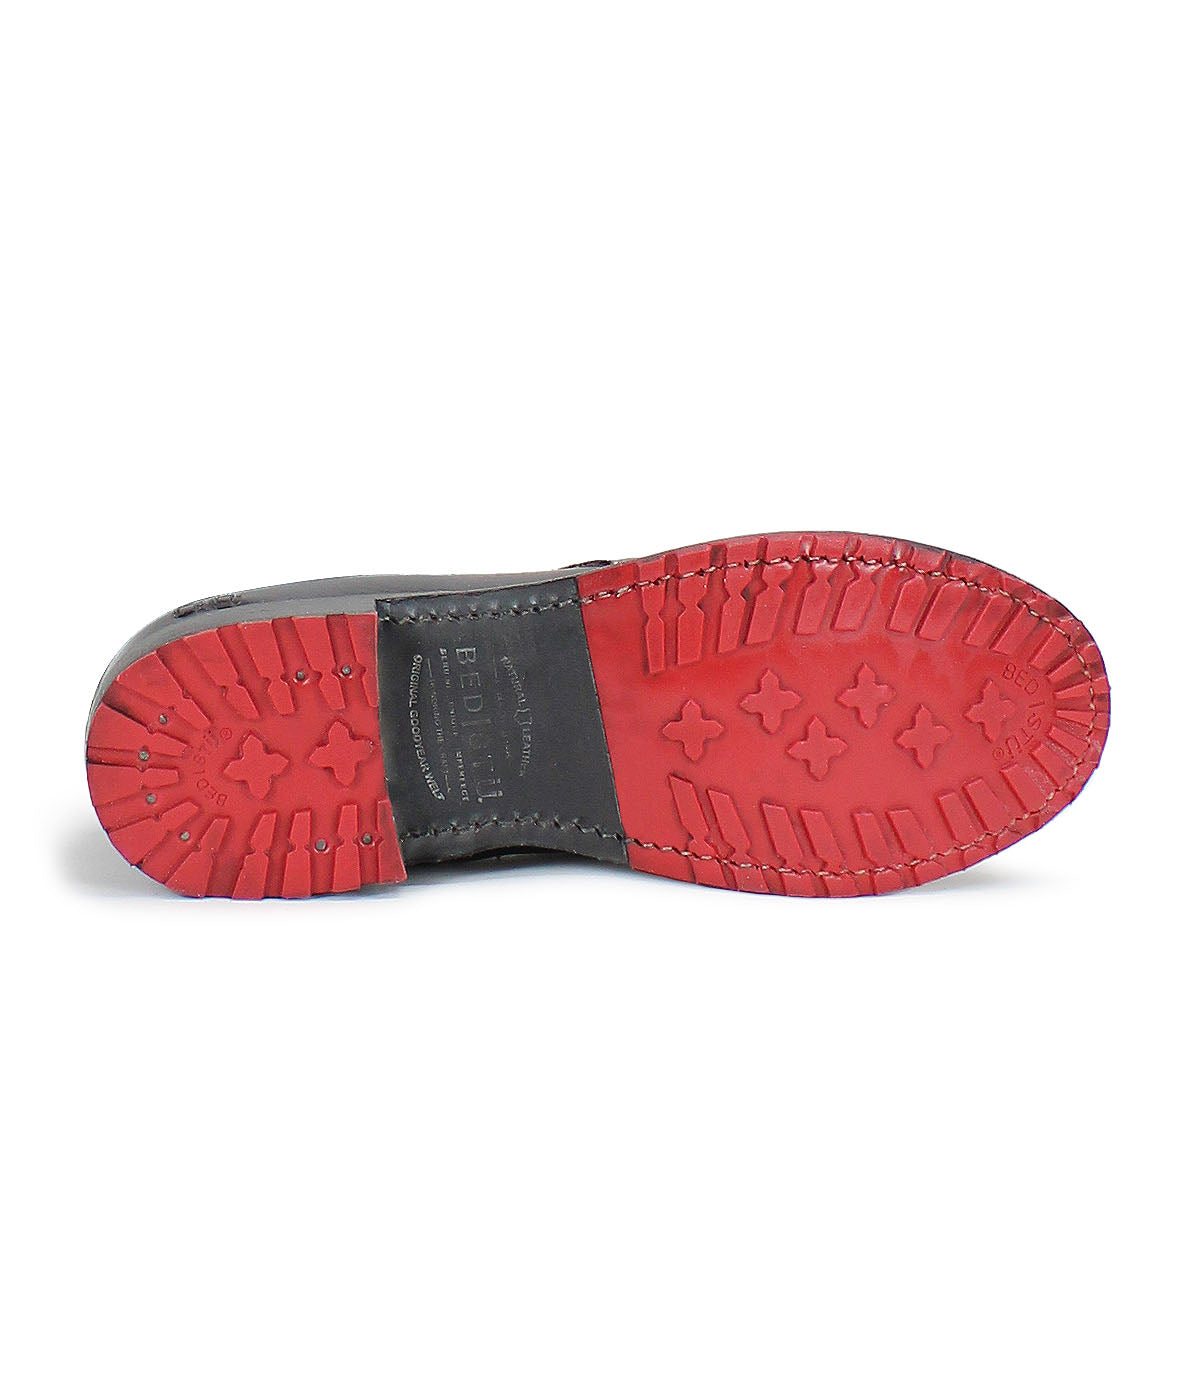 A pair of Bed Stu Bristol Wide Calf shoes with red and black soles on a white background.